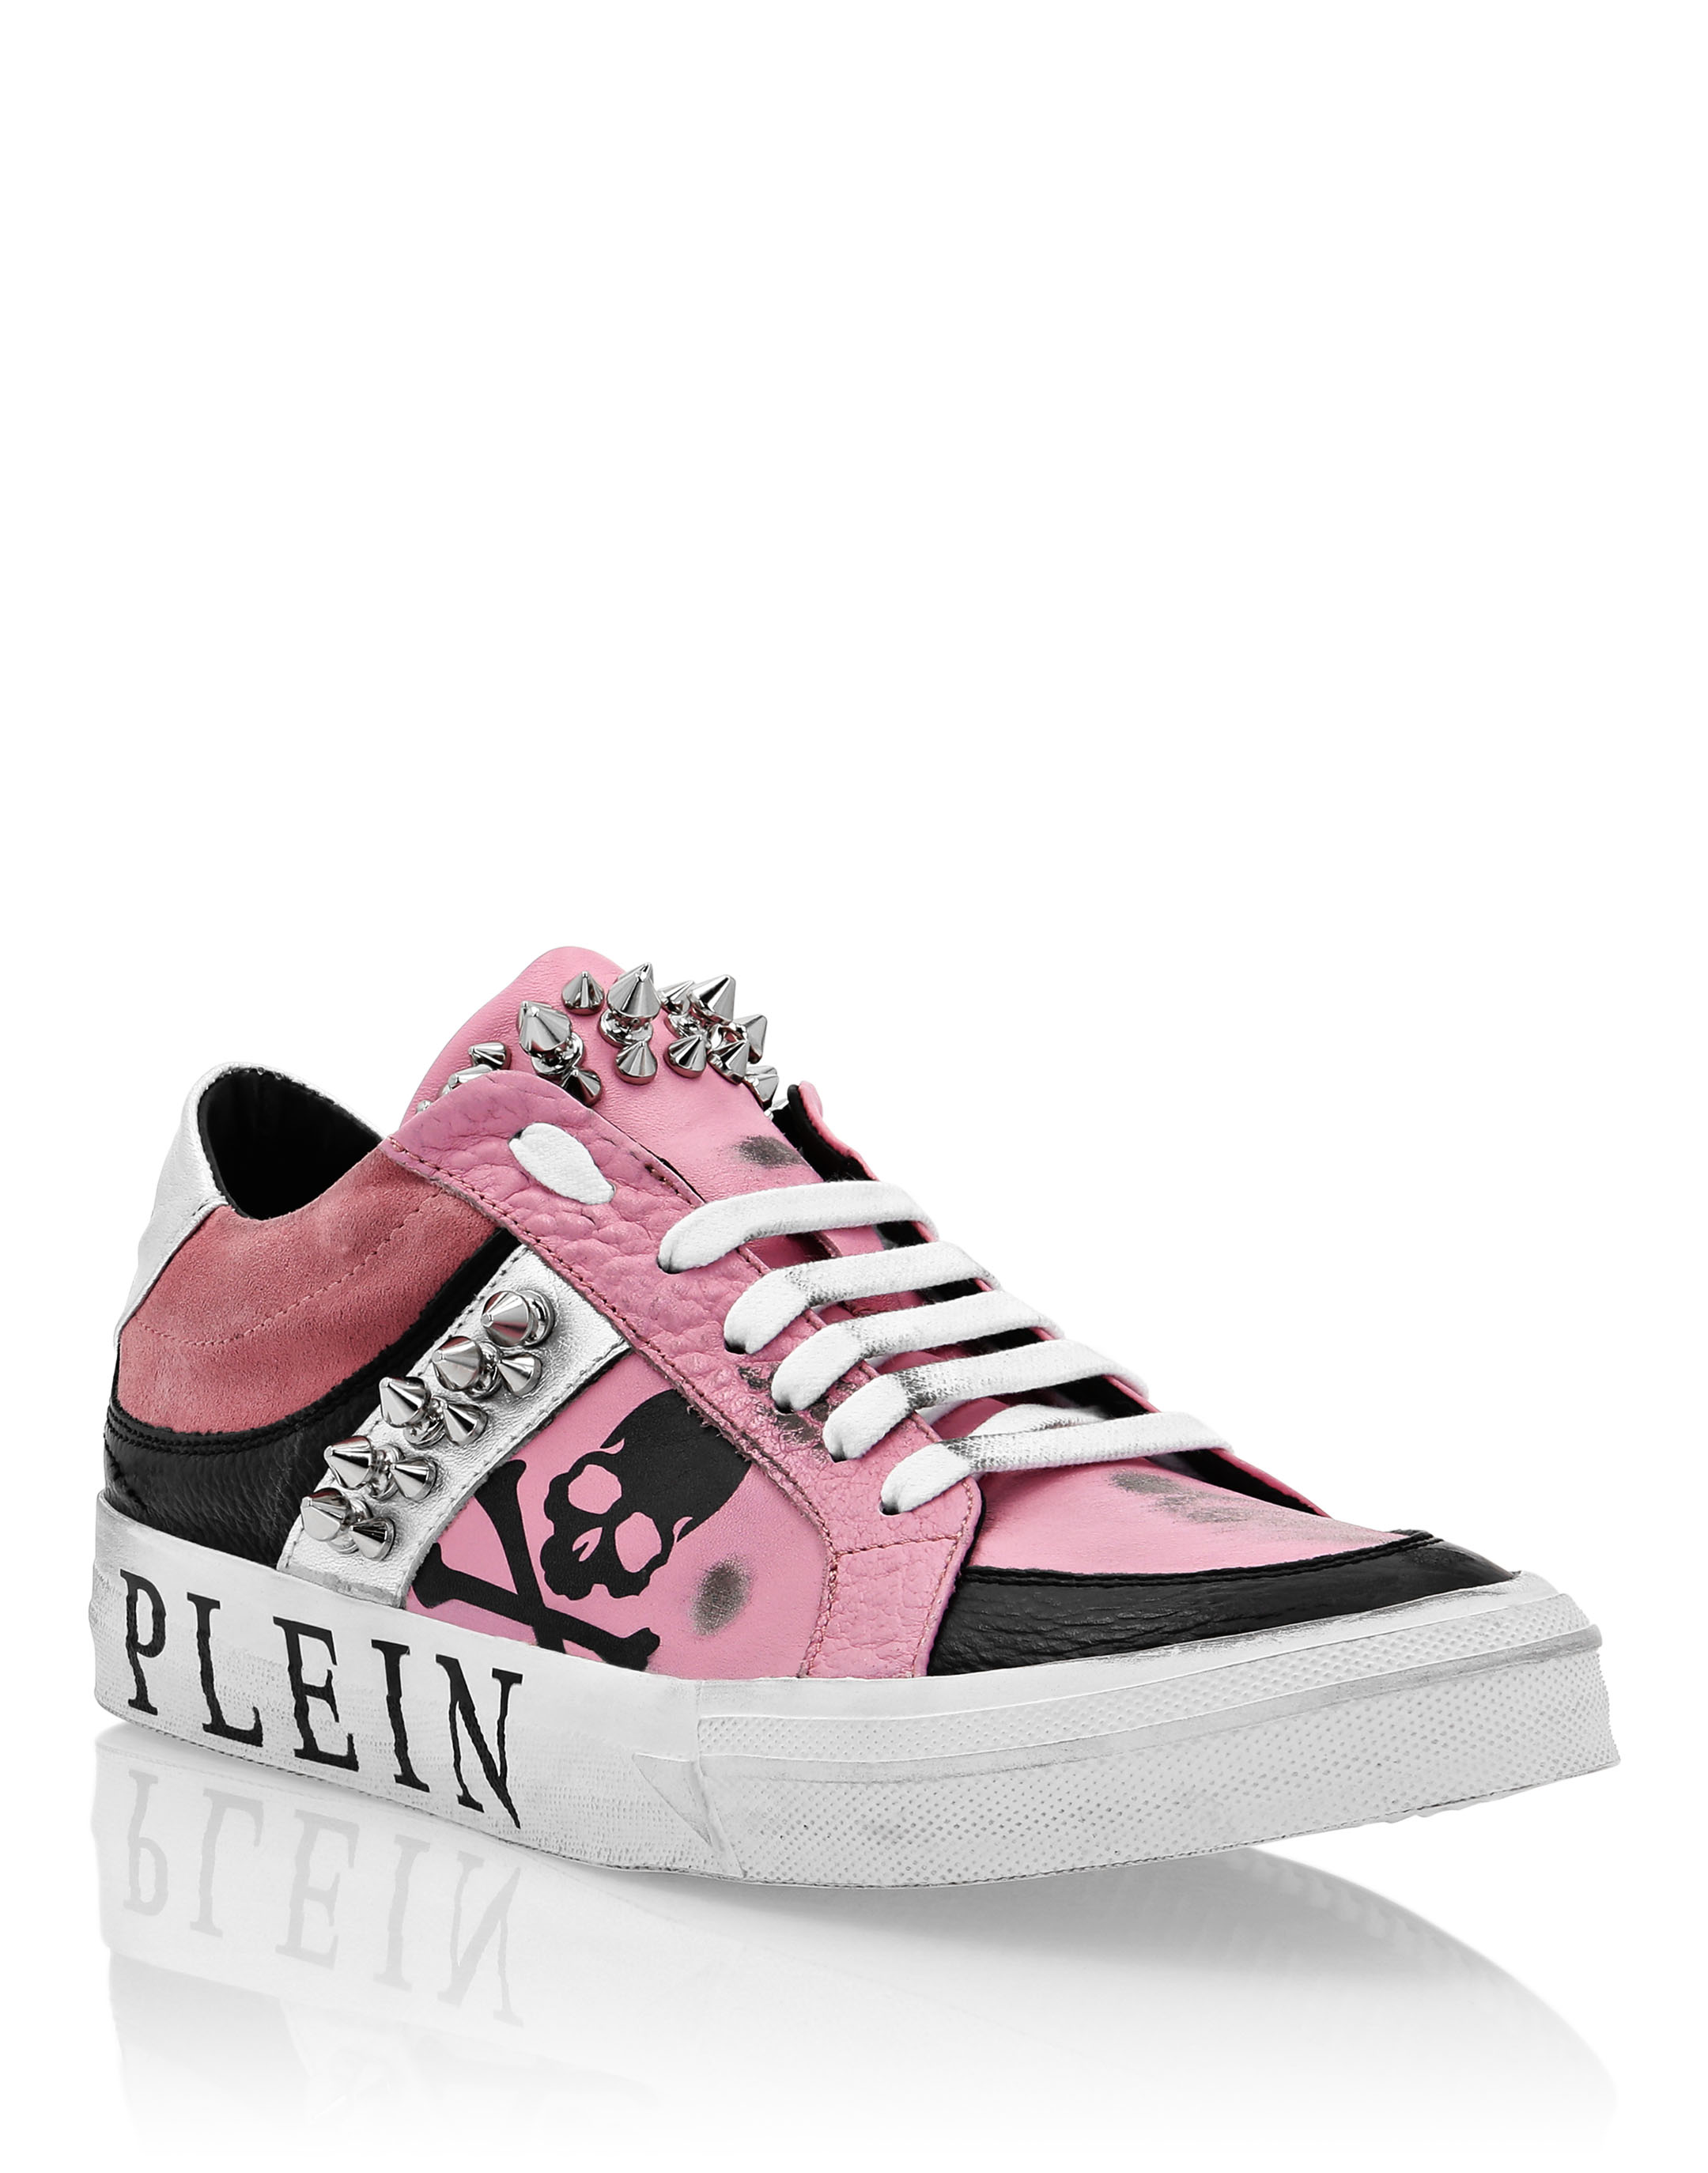 PINK EDITION Hi-Top Sneakers | Philipp Plein Outlet